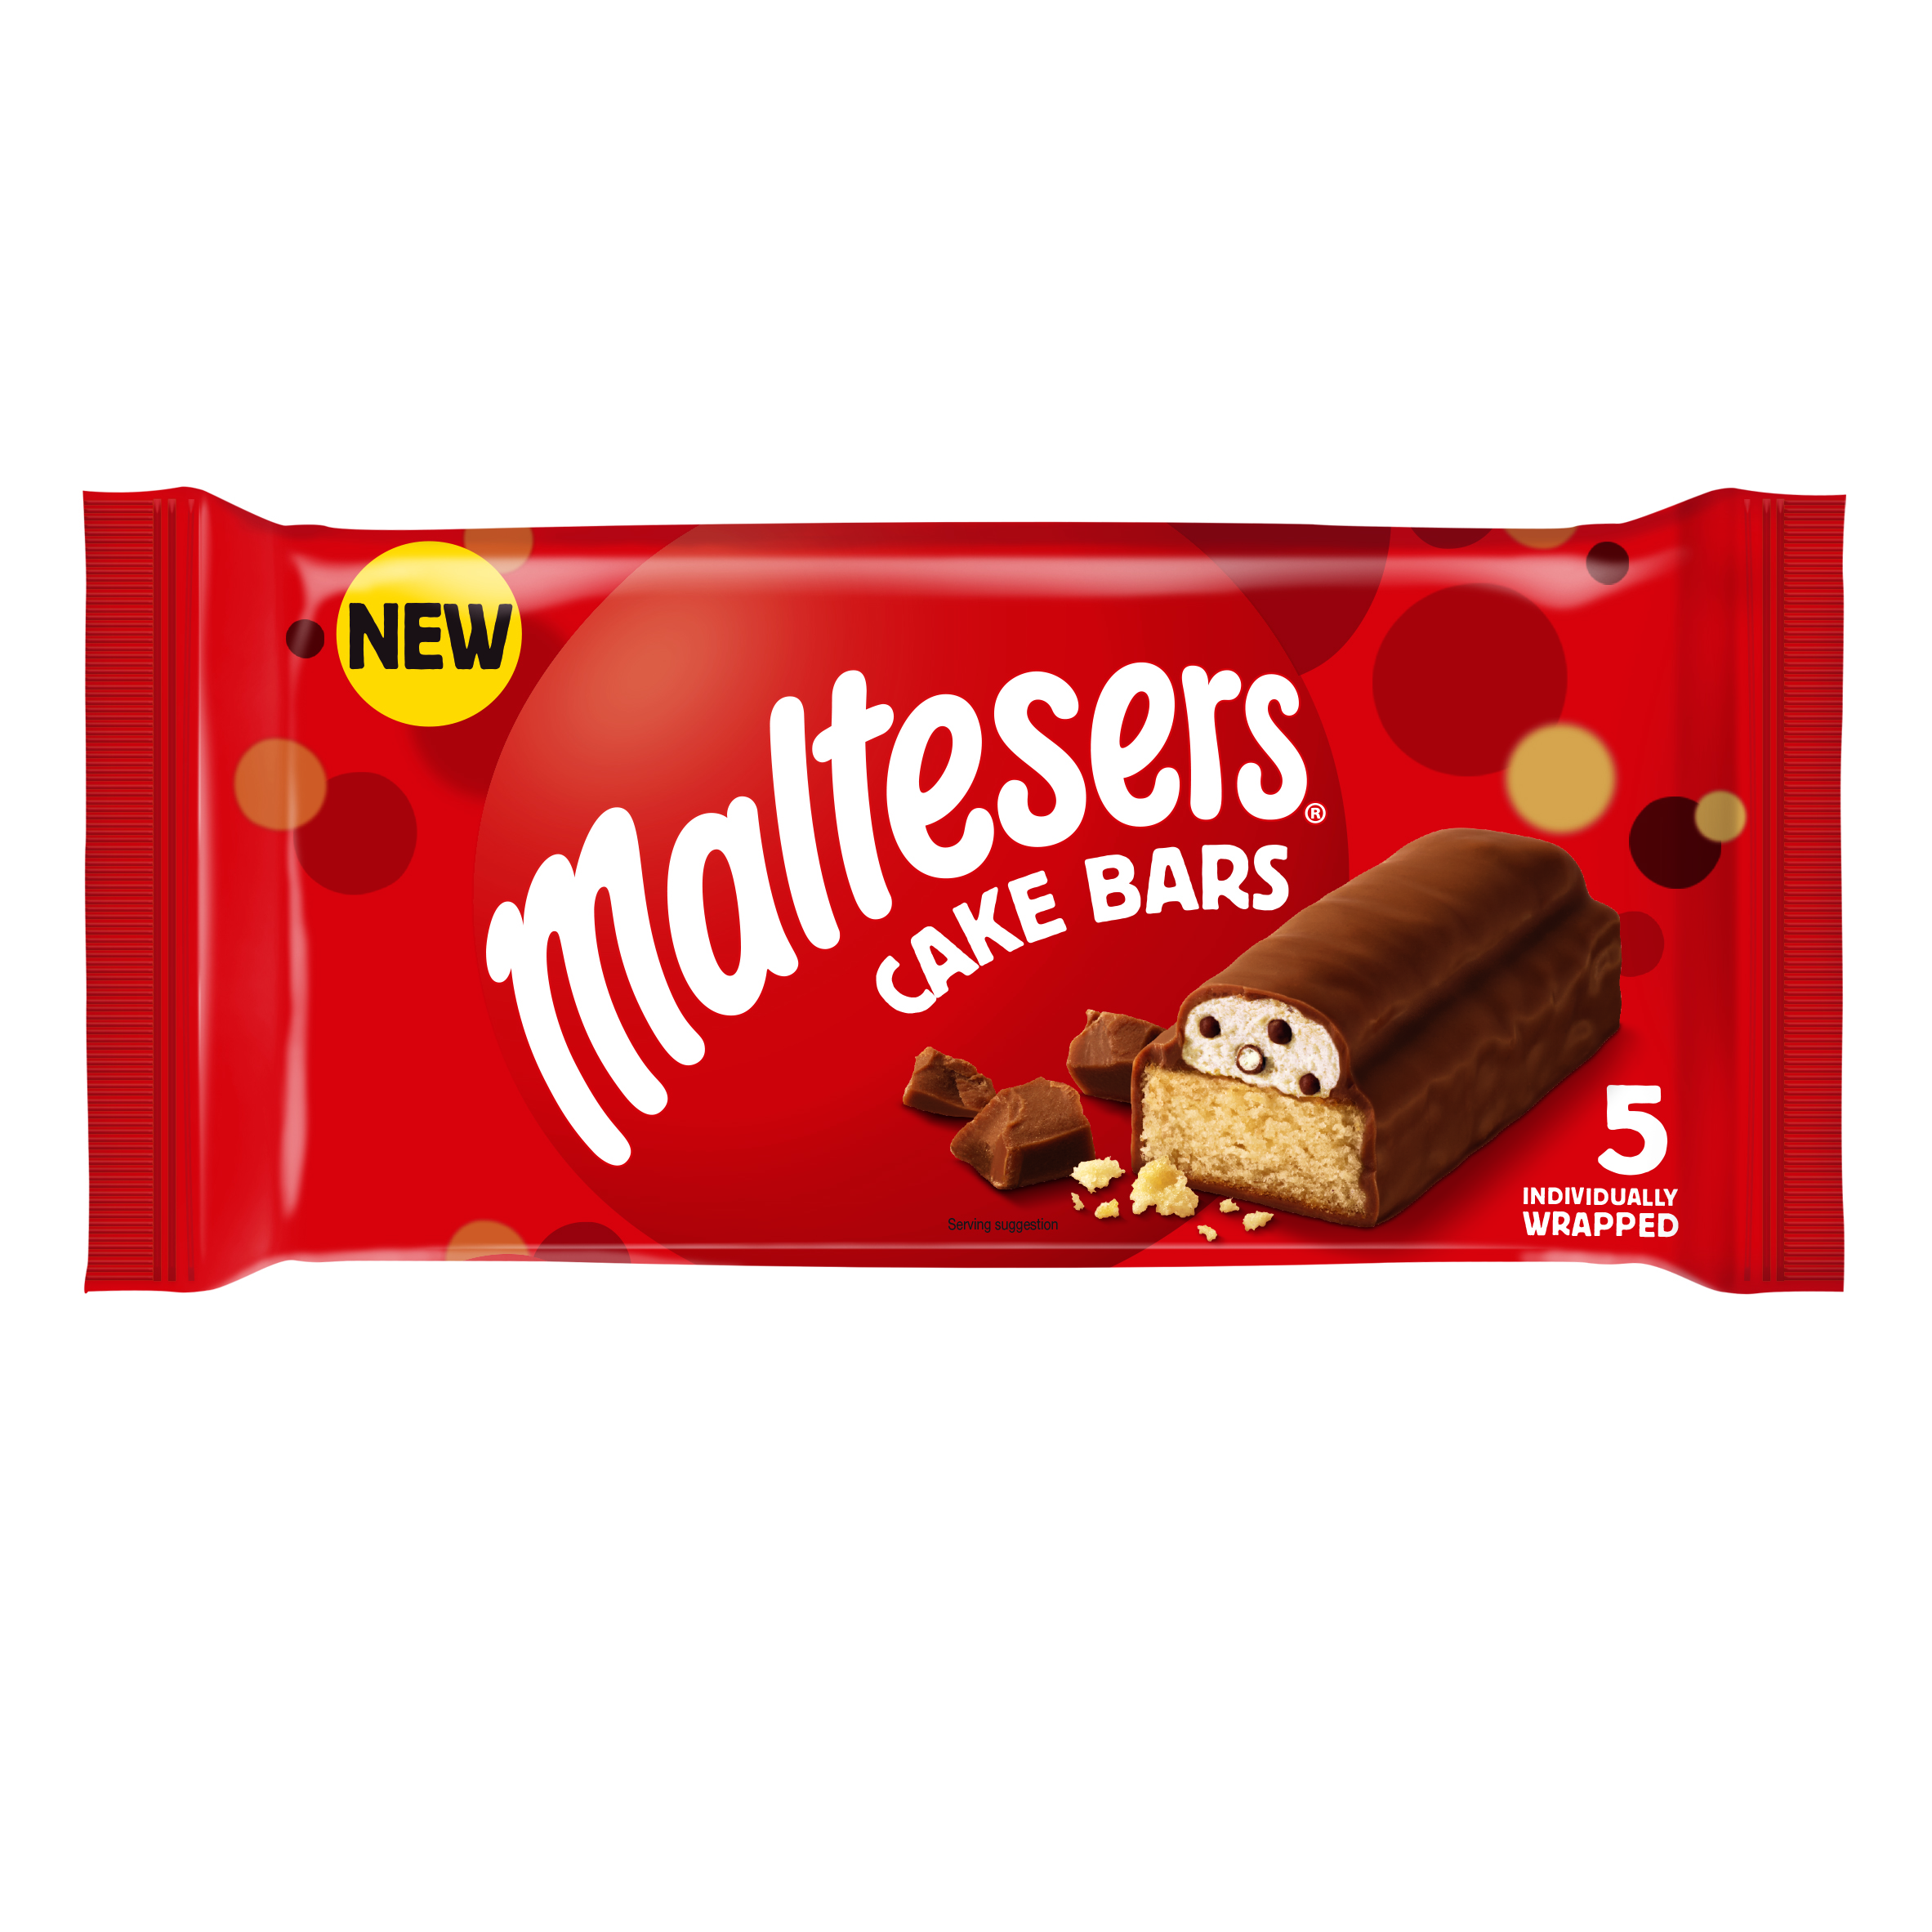 Mars reveals Maltesers Cake Bar with added crunch